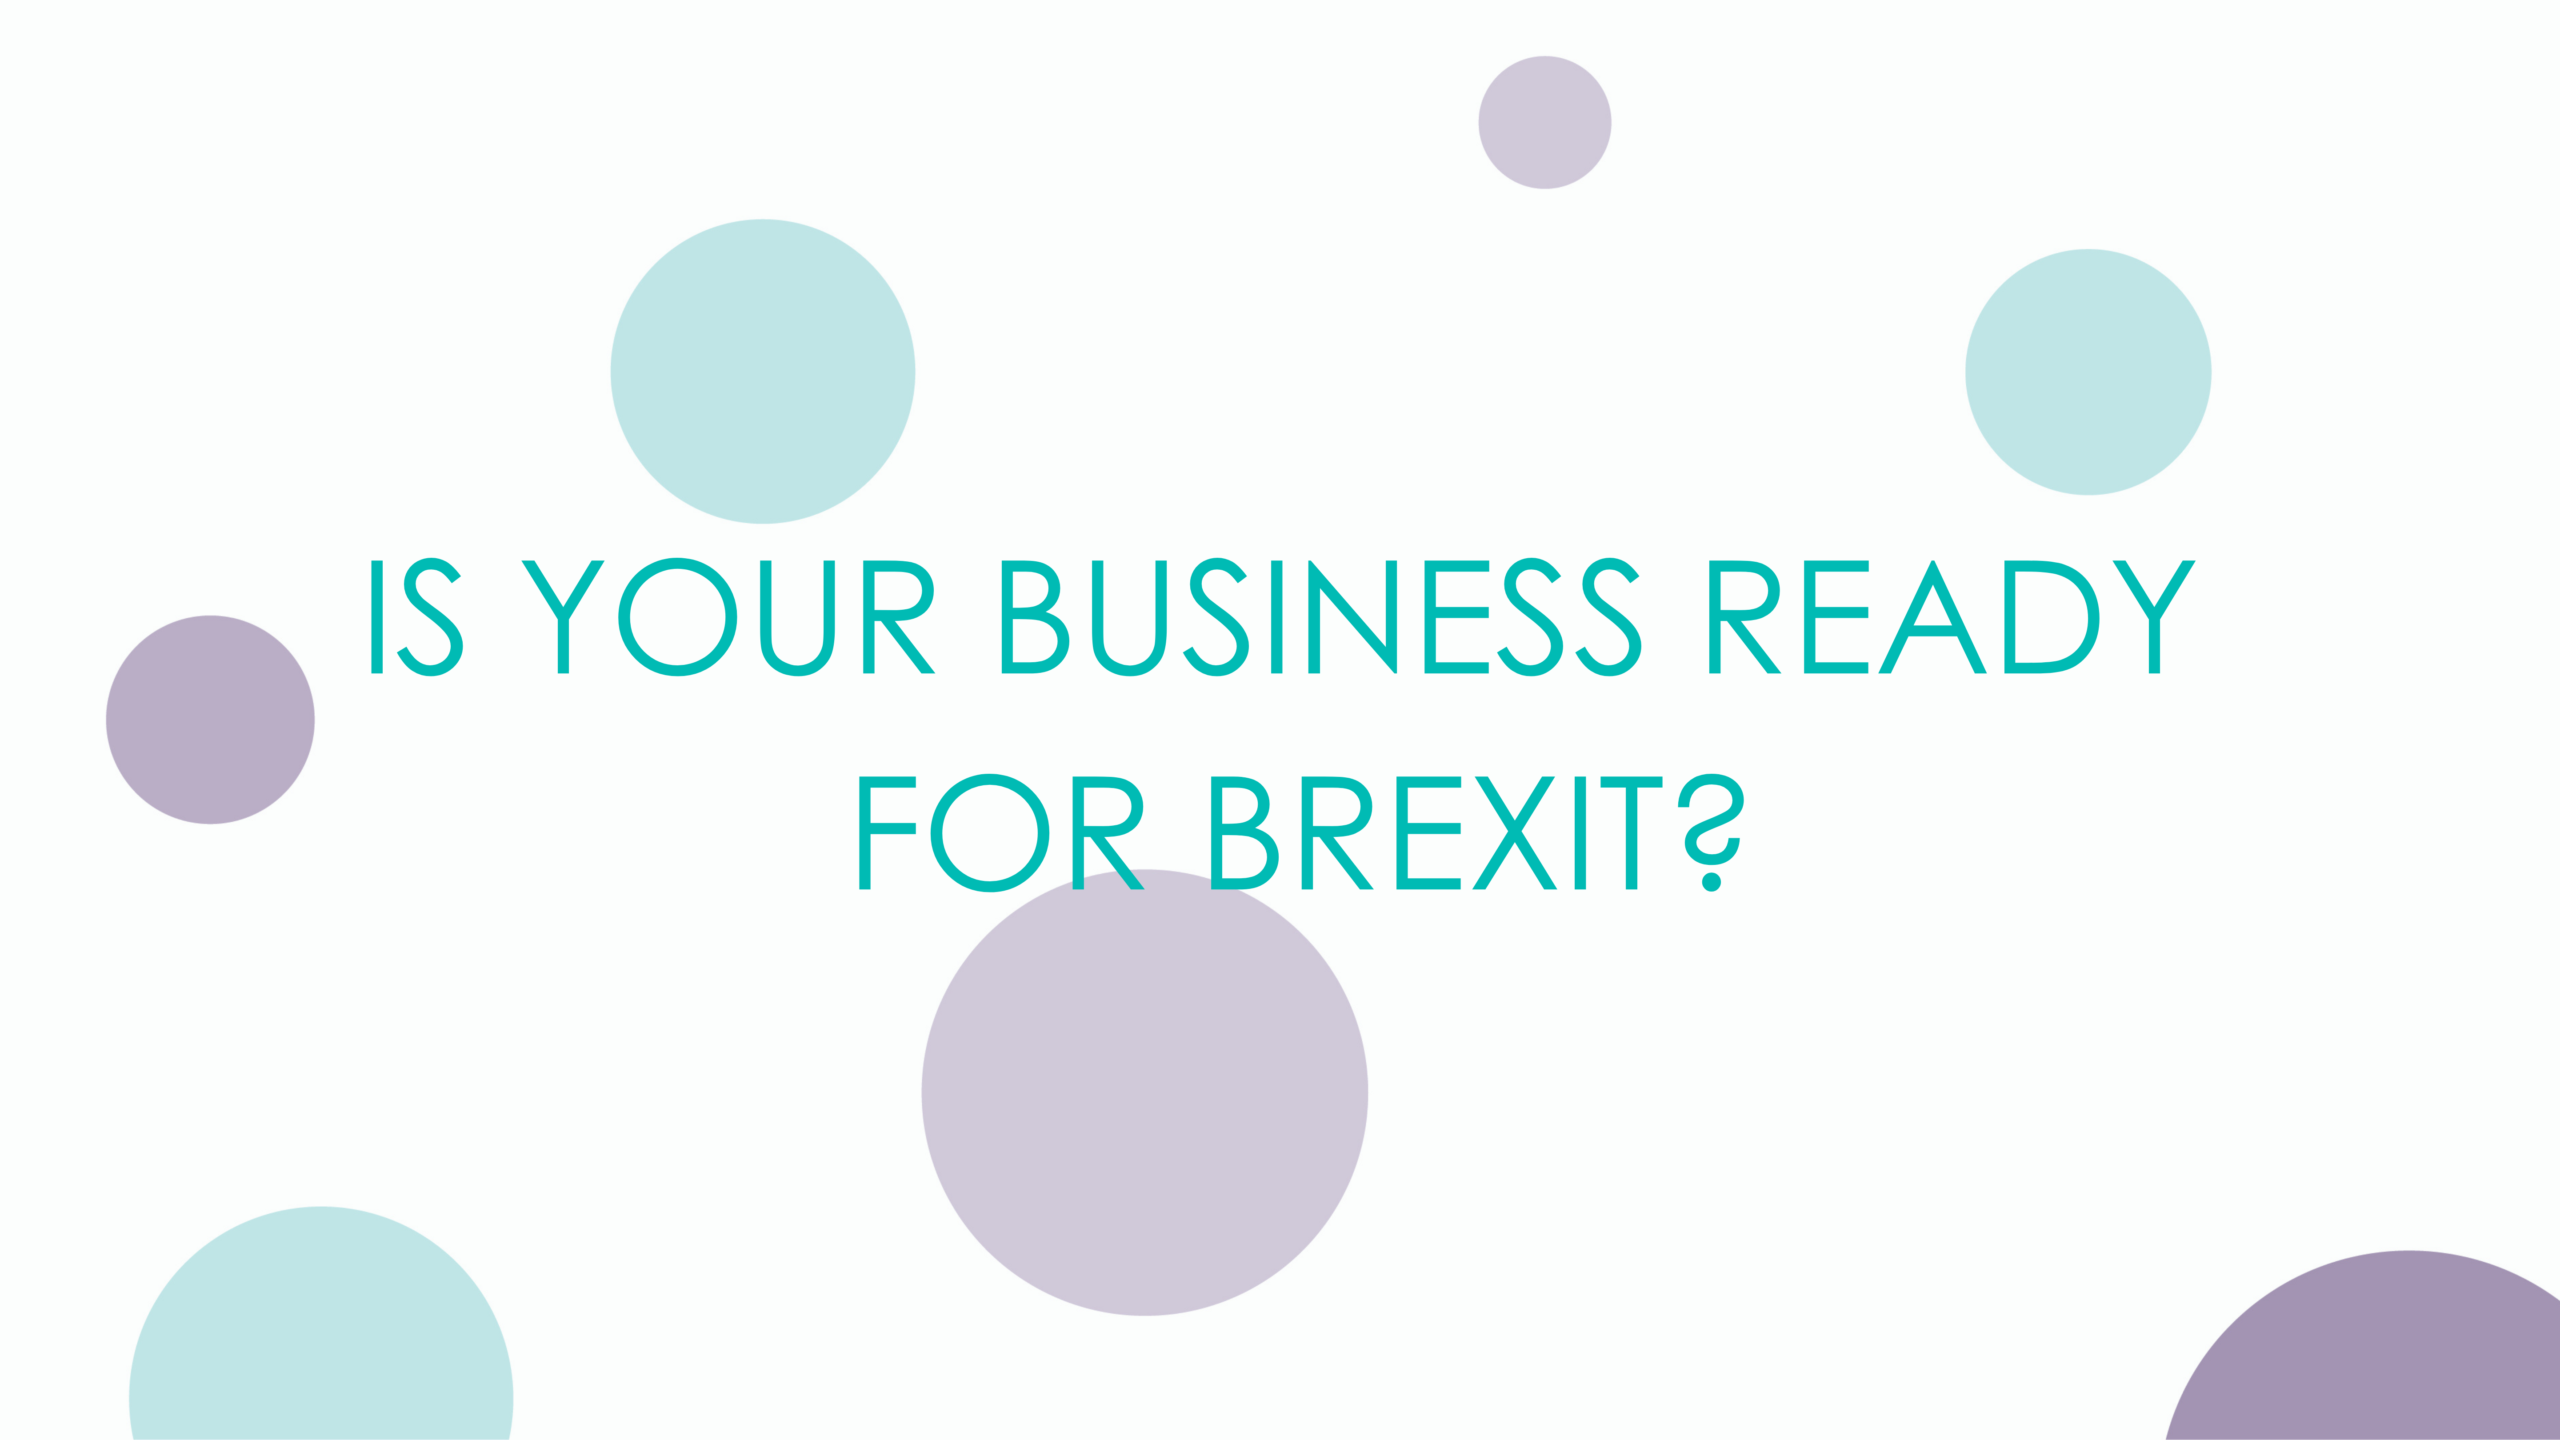 IS YOUR BUSINESS READY FOR BREXIT?